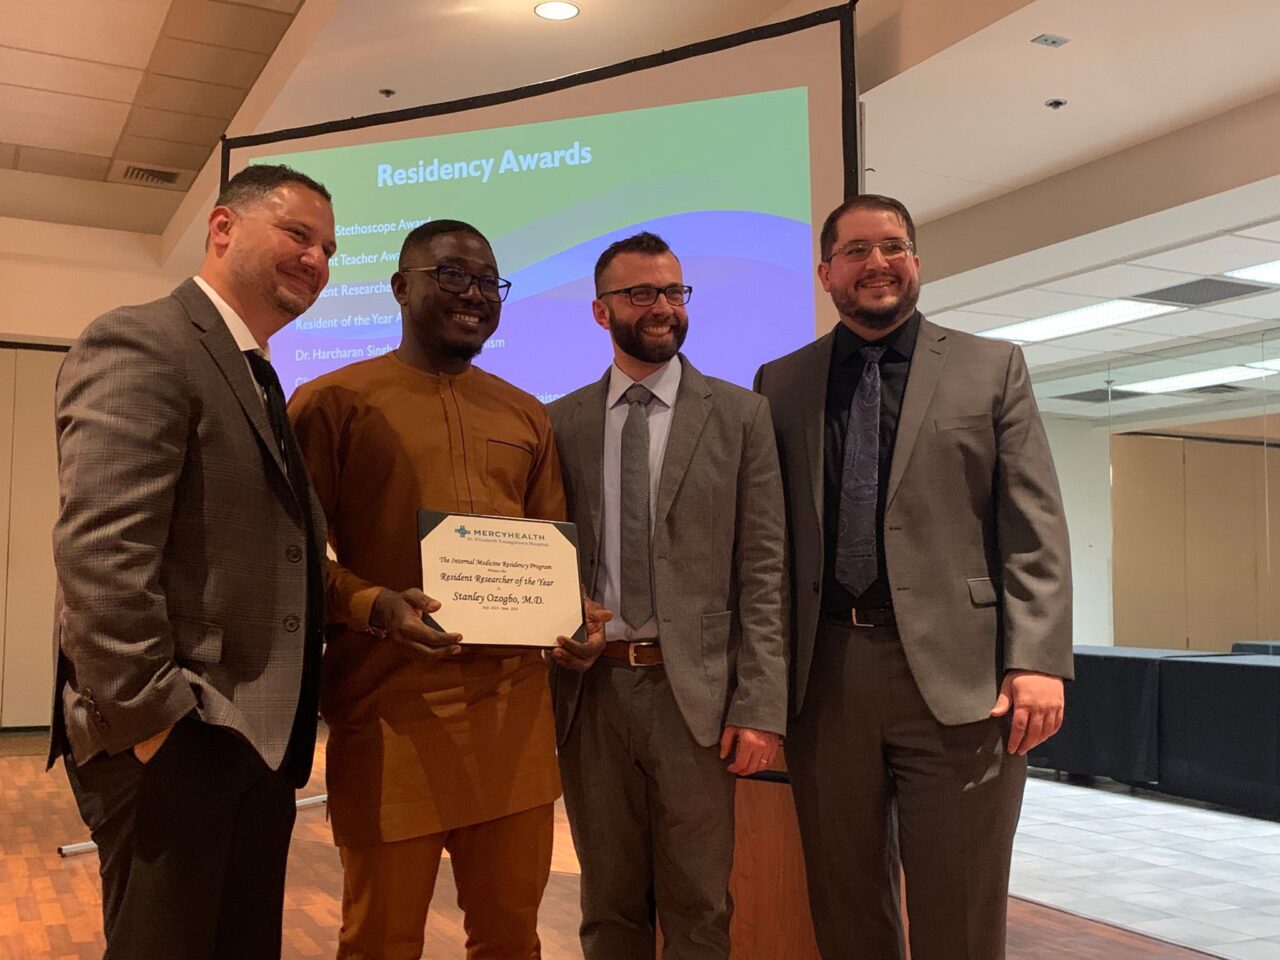 Stanley Ozogbo: Honor to have received the Resident Researcher of the Year award